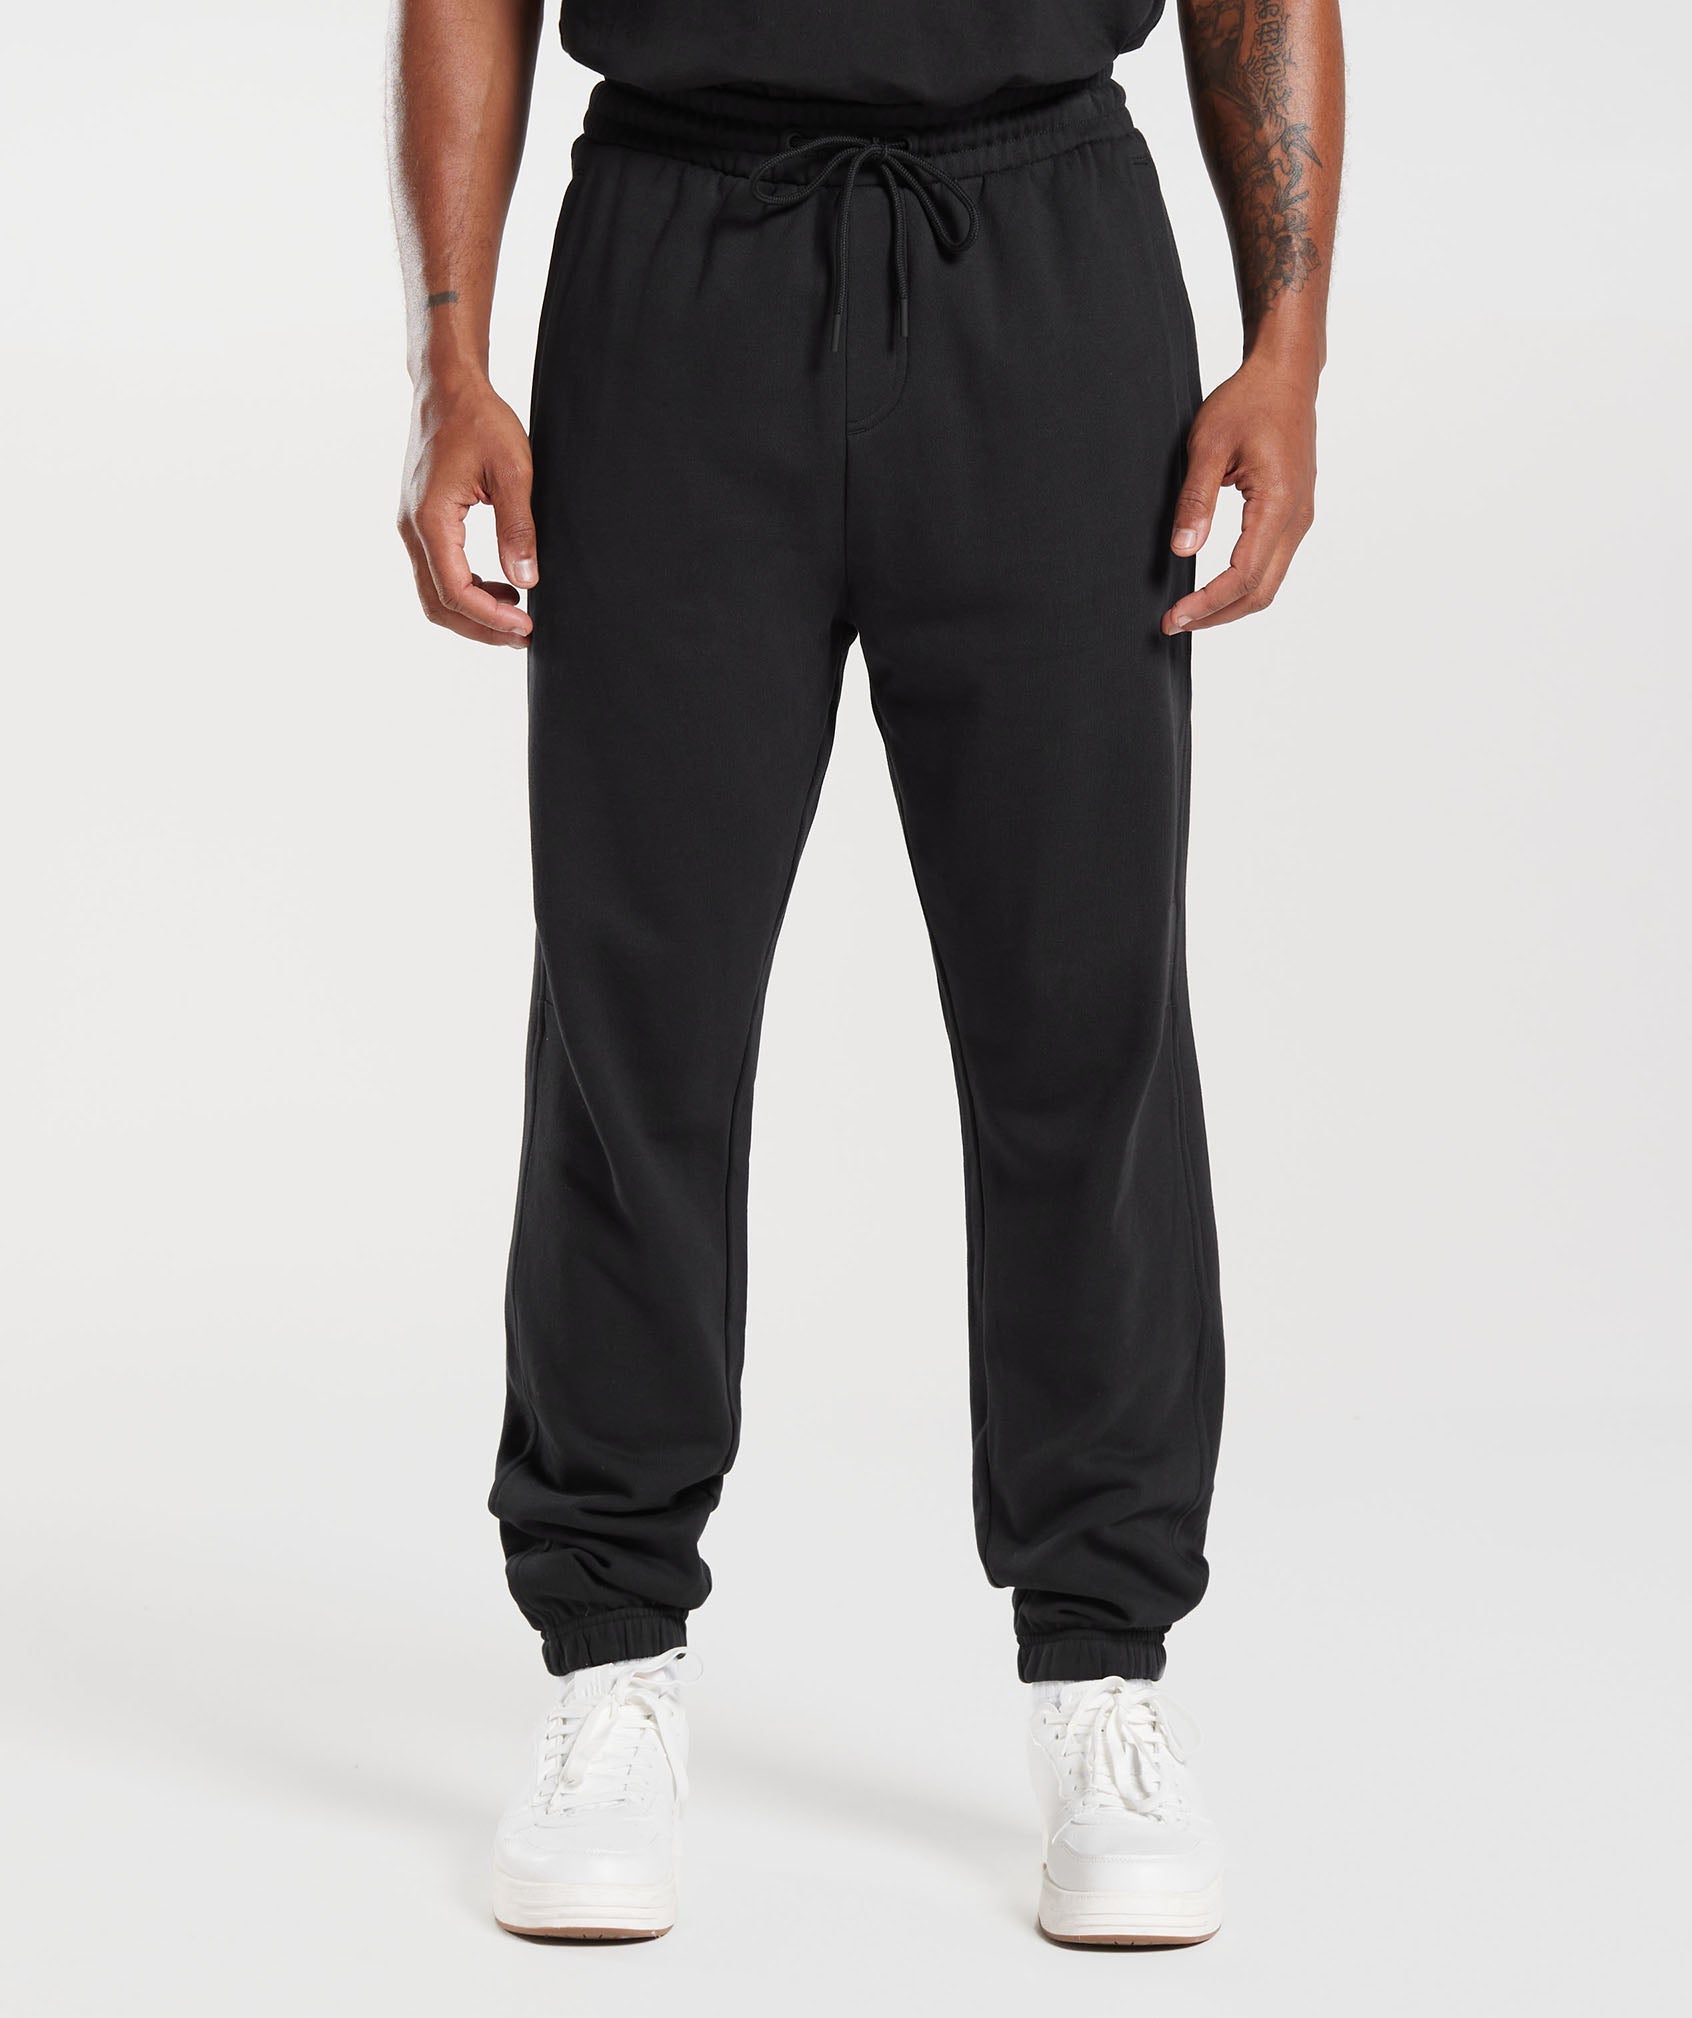 Rest Day Essentials Joggers in Black